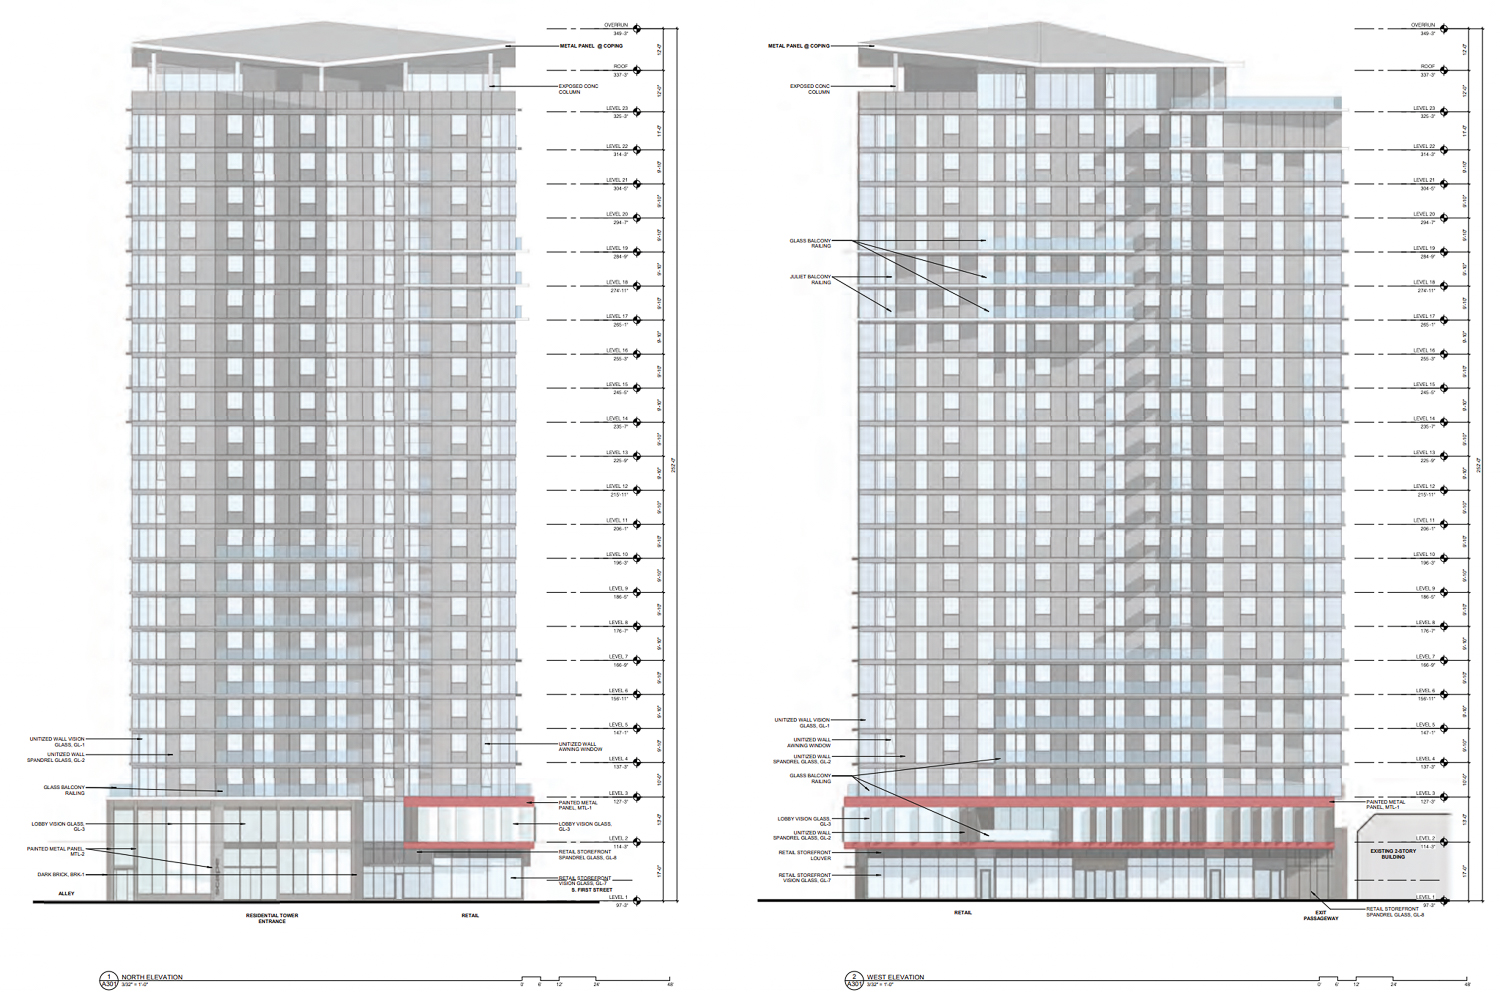 600 South 1st Street north and west elevations, illustration via C2K Architecture